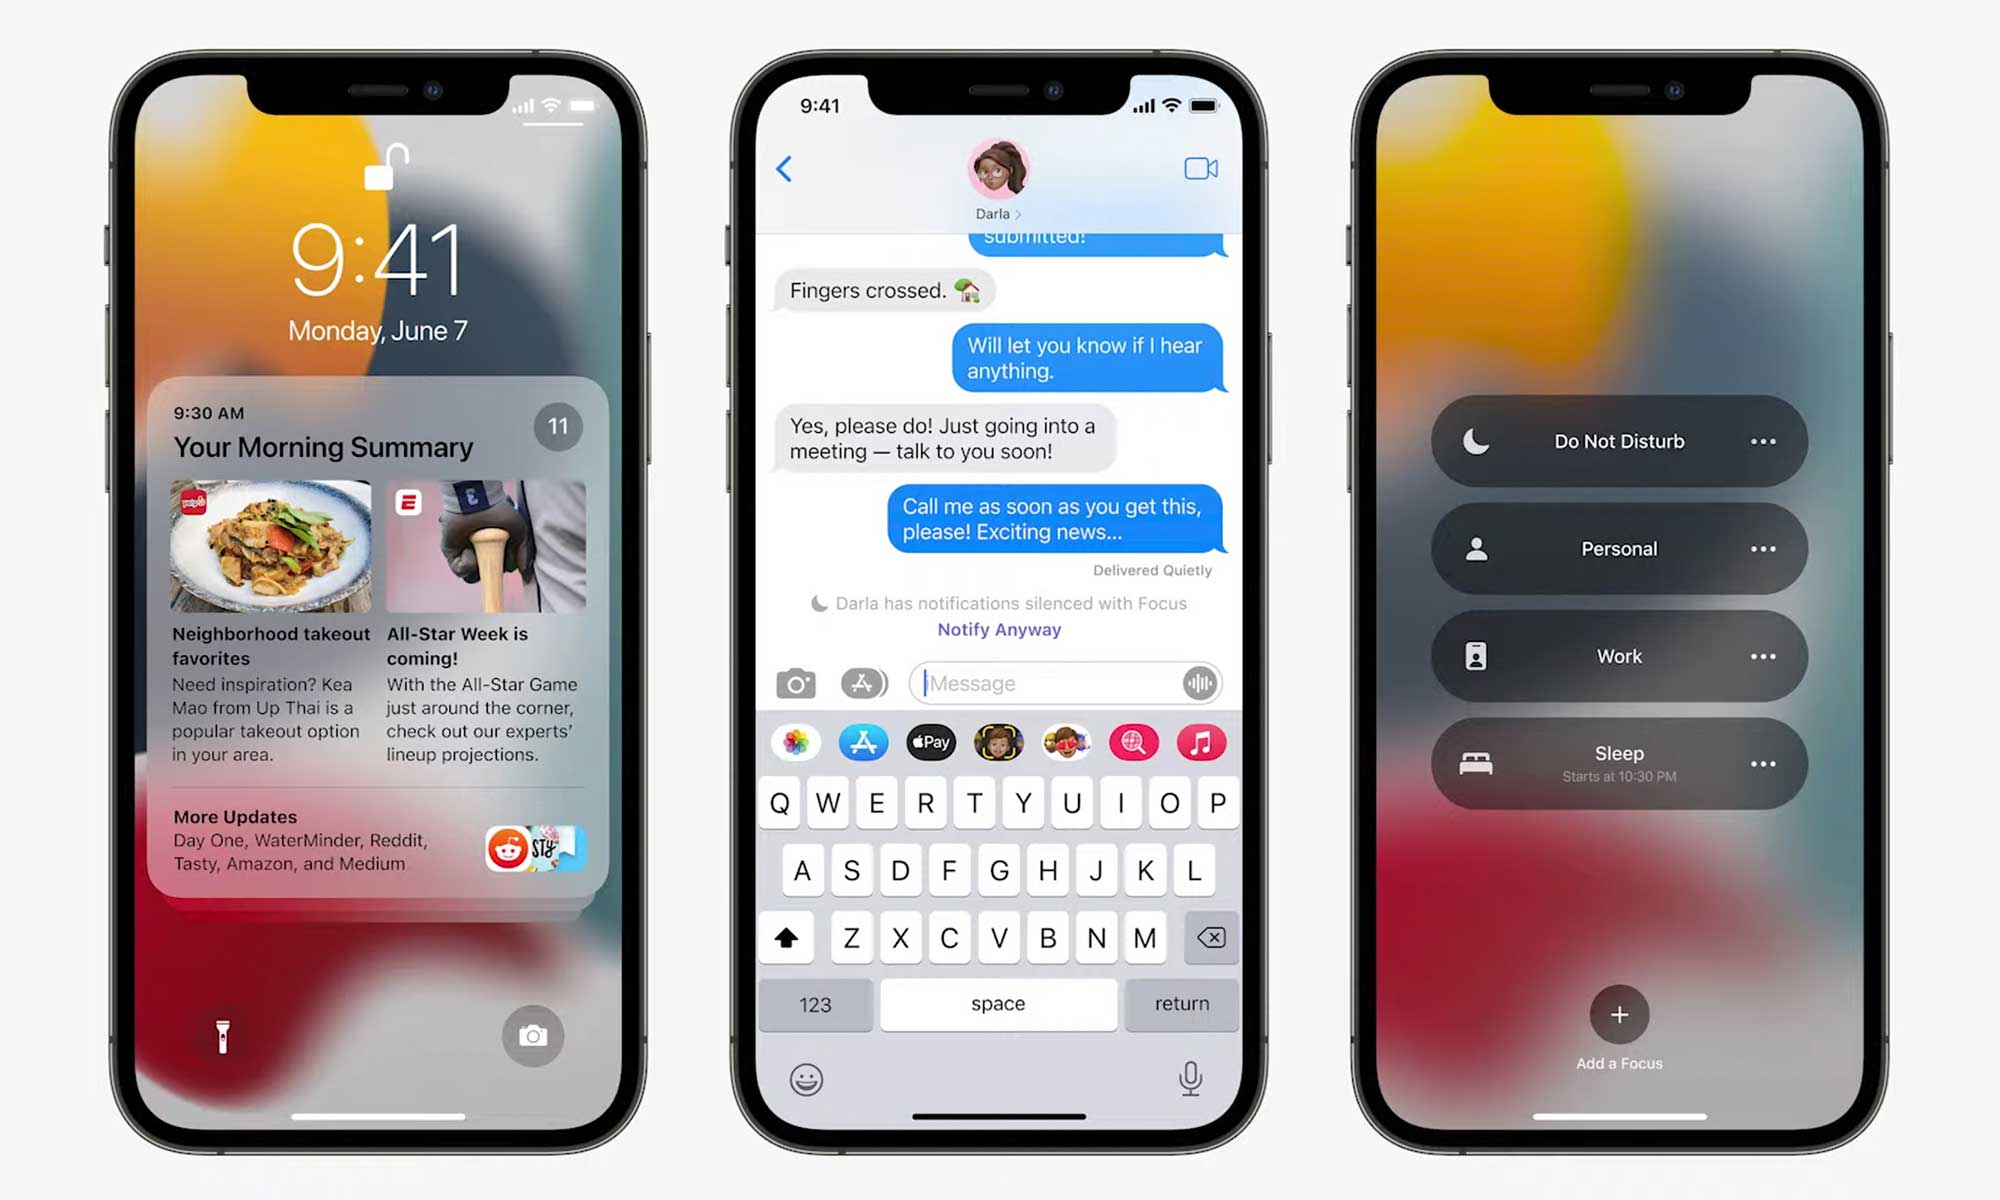 Apple Announces iOS 15 and iPadOS 15 With Loads of New Features